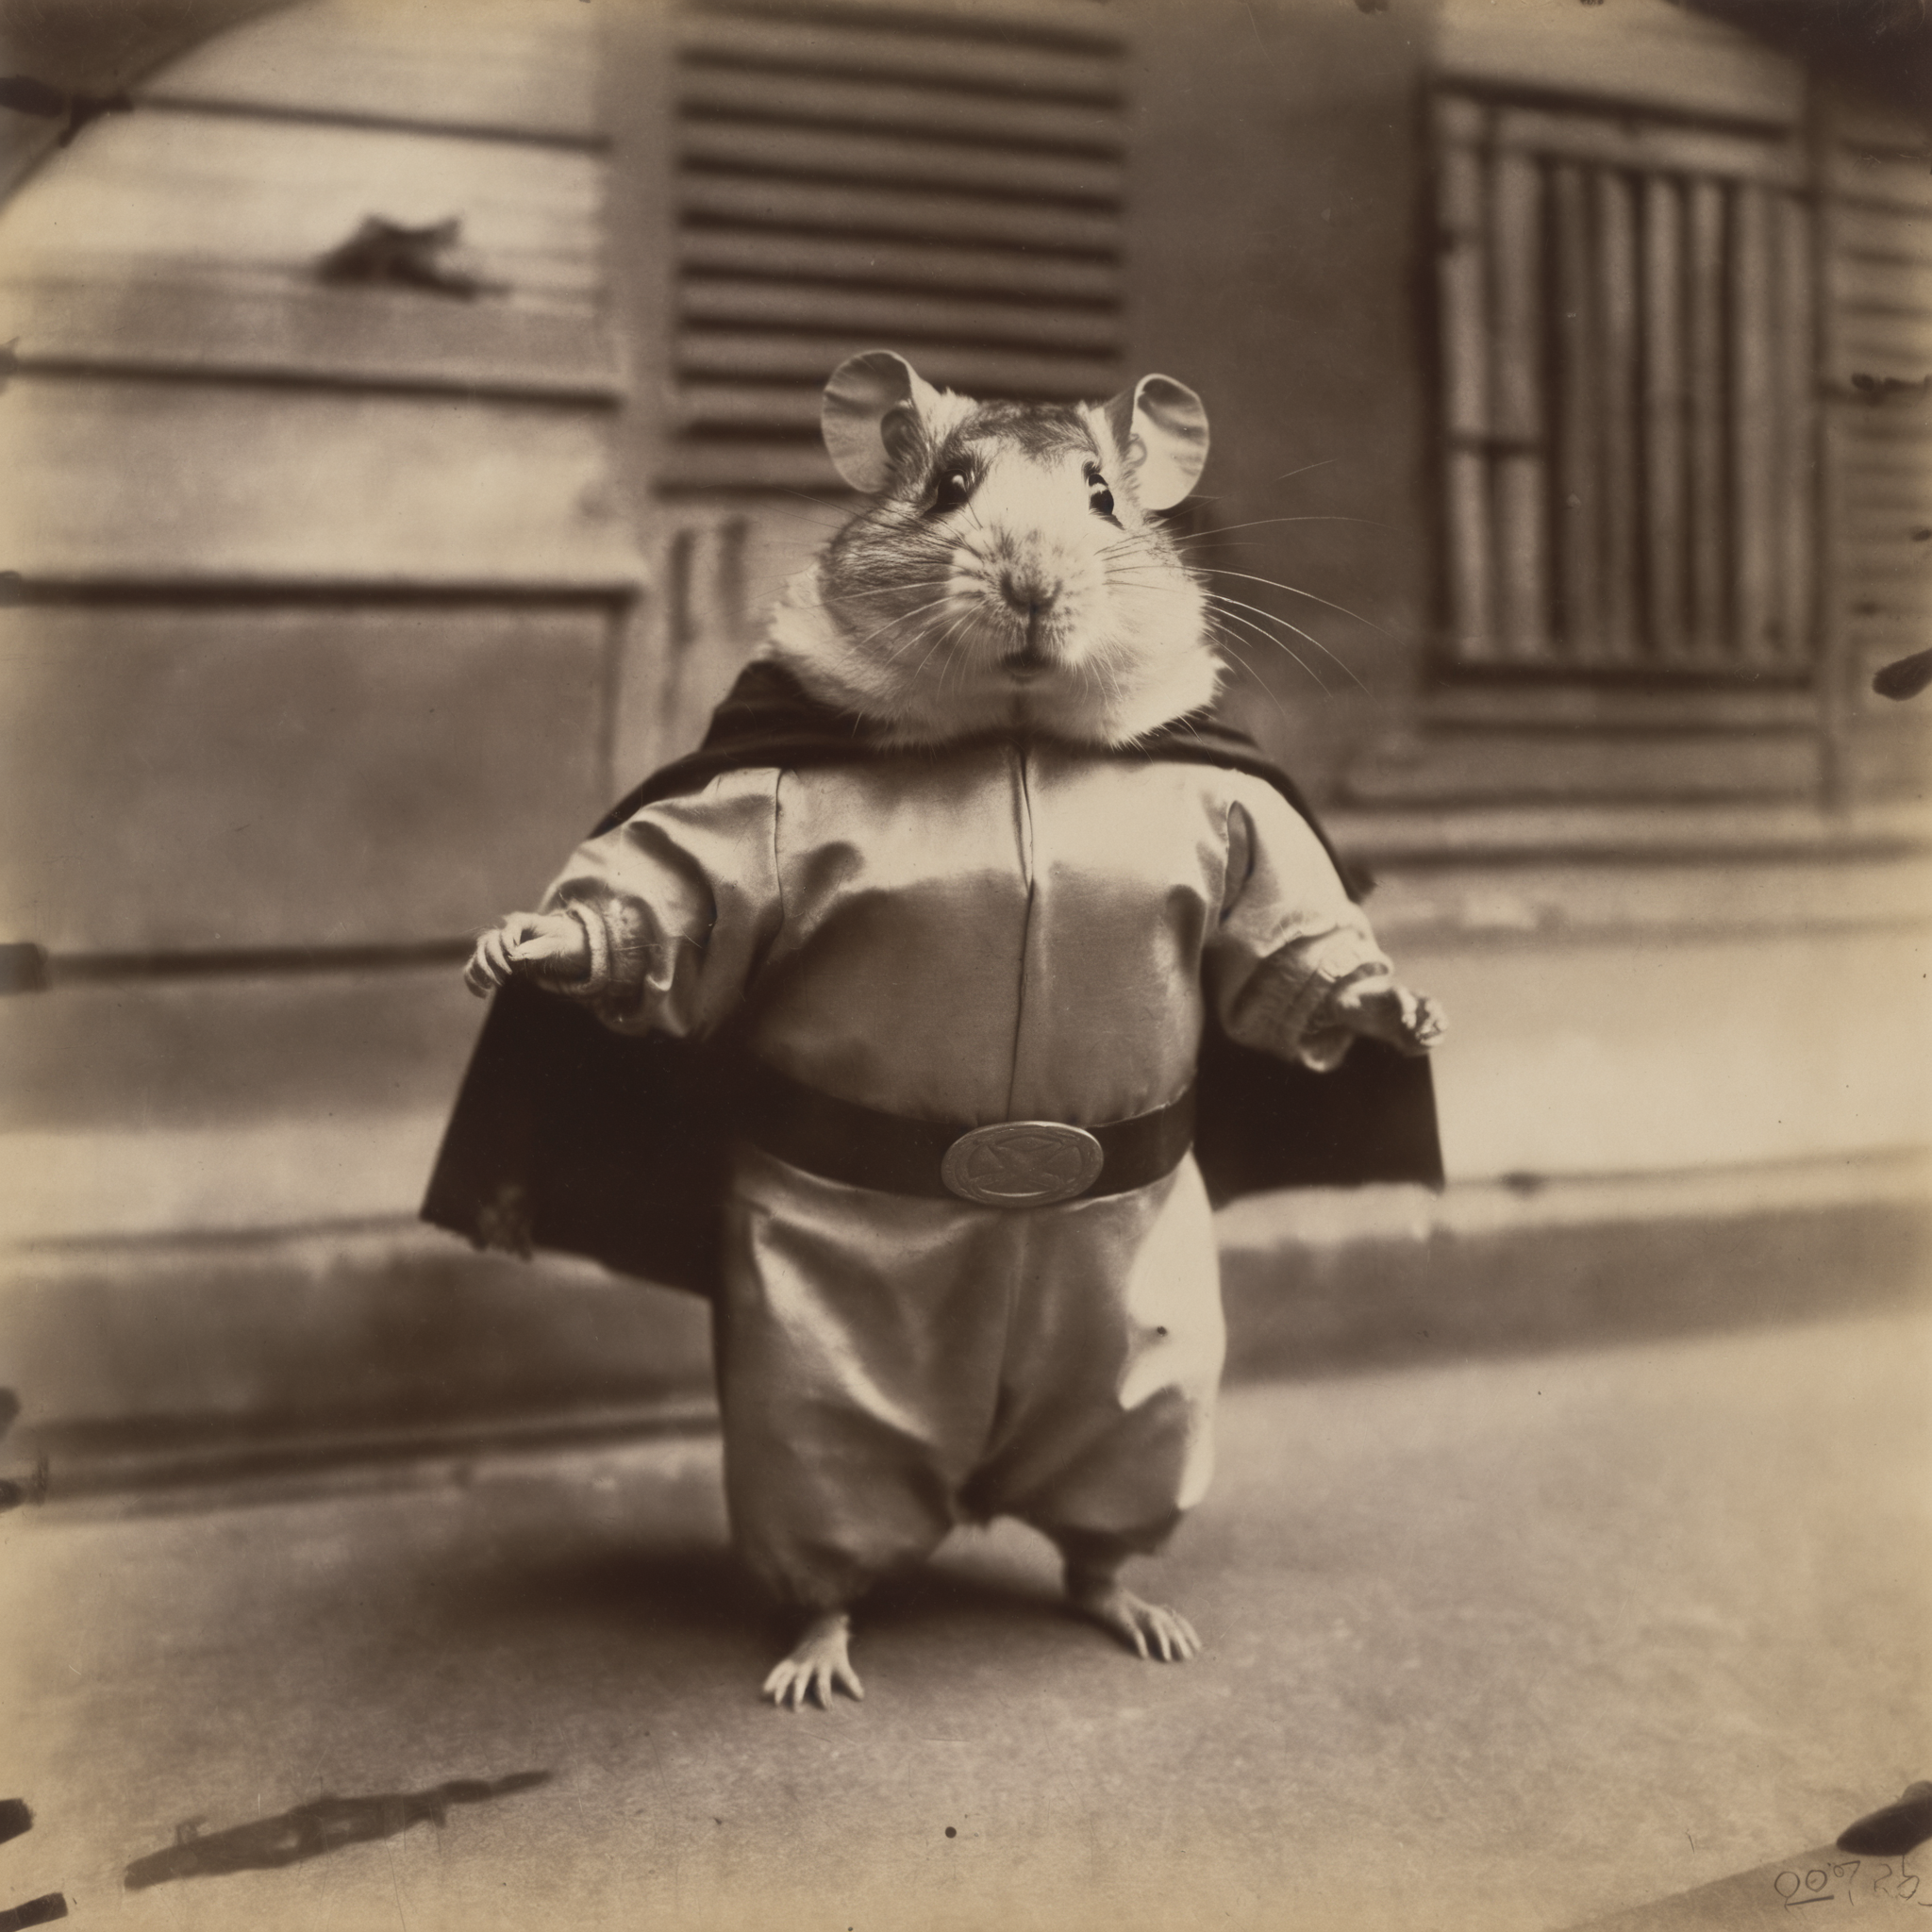 a historical antique photograph of a hamster in a superhero costume, by Eugène Atget